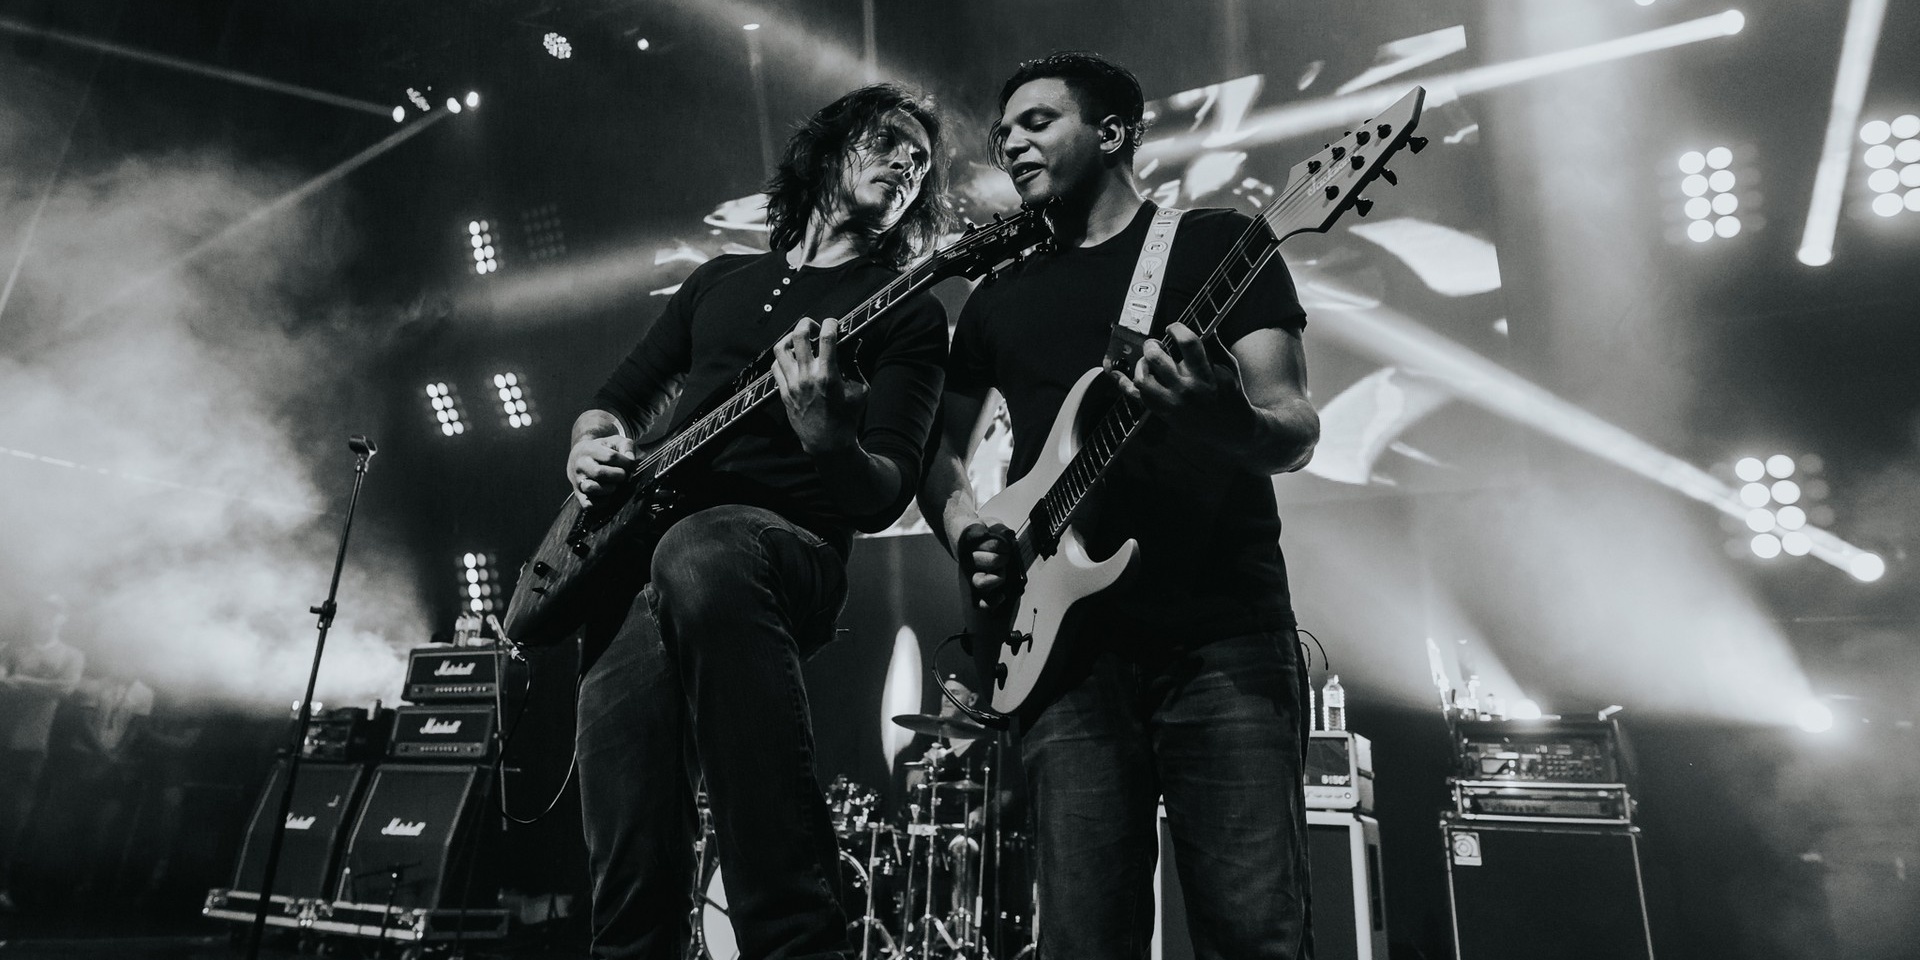 Periphery share updates on forthcoming album from the studio